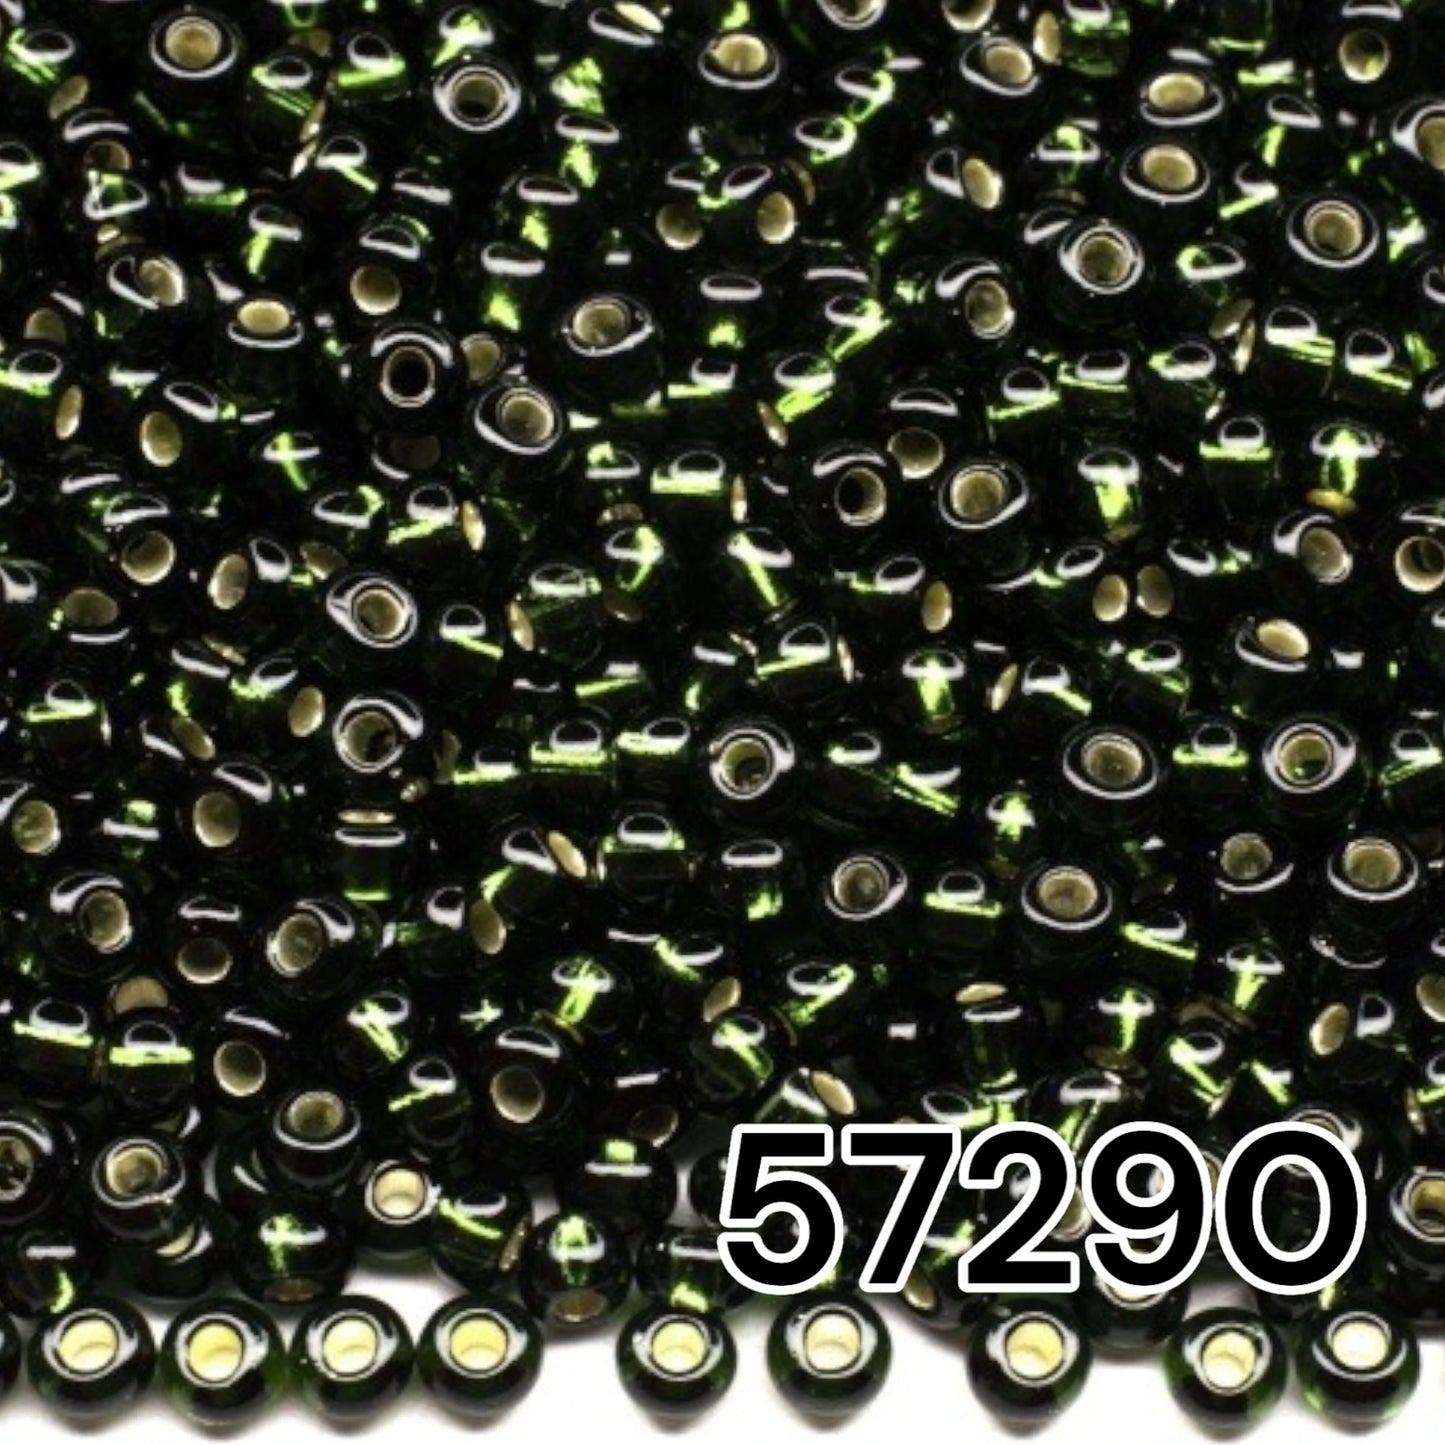 10/0 57290 Preciosa Seed Beads. Green transparent Silver lined.